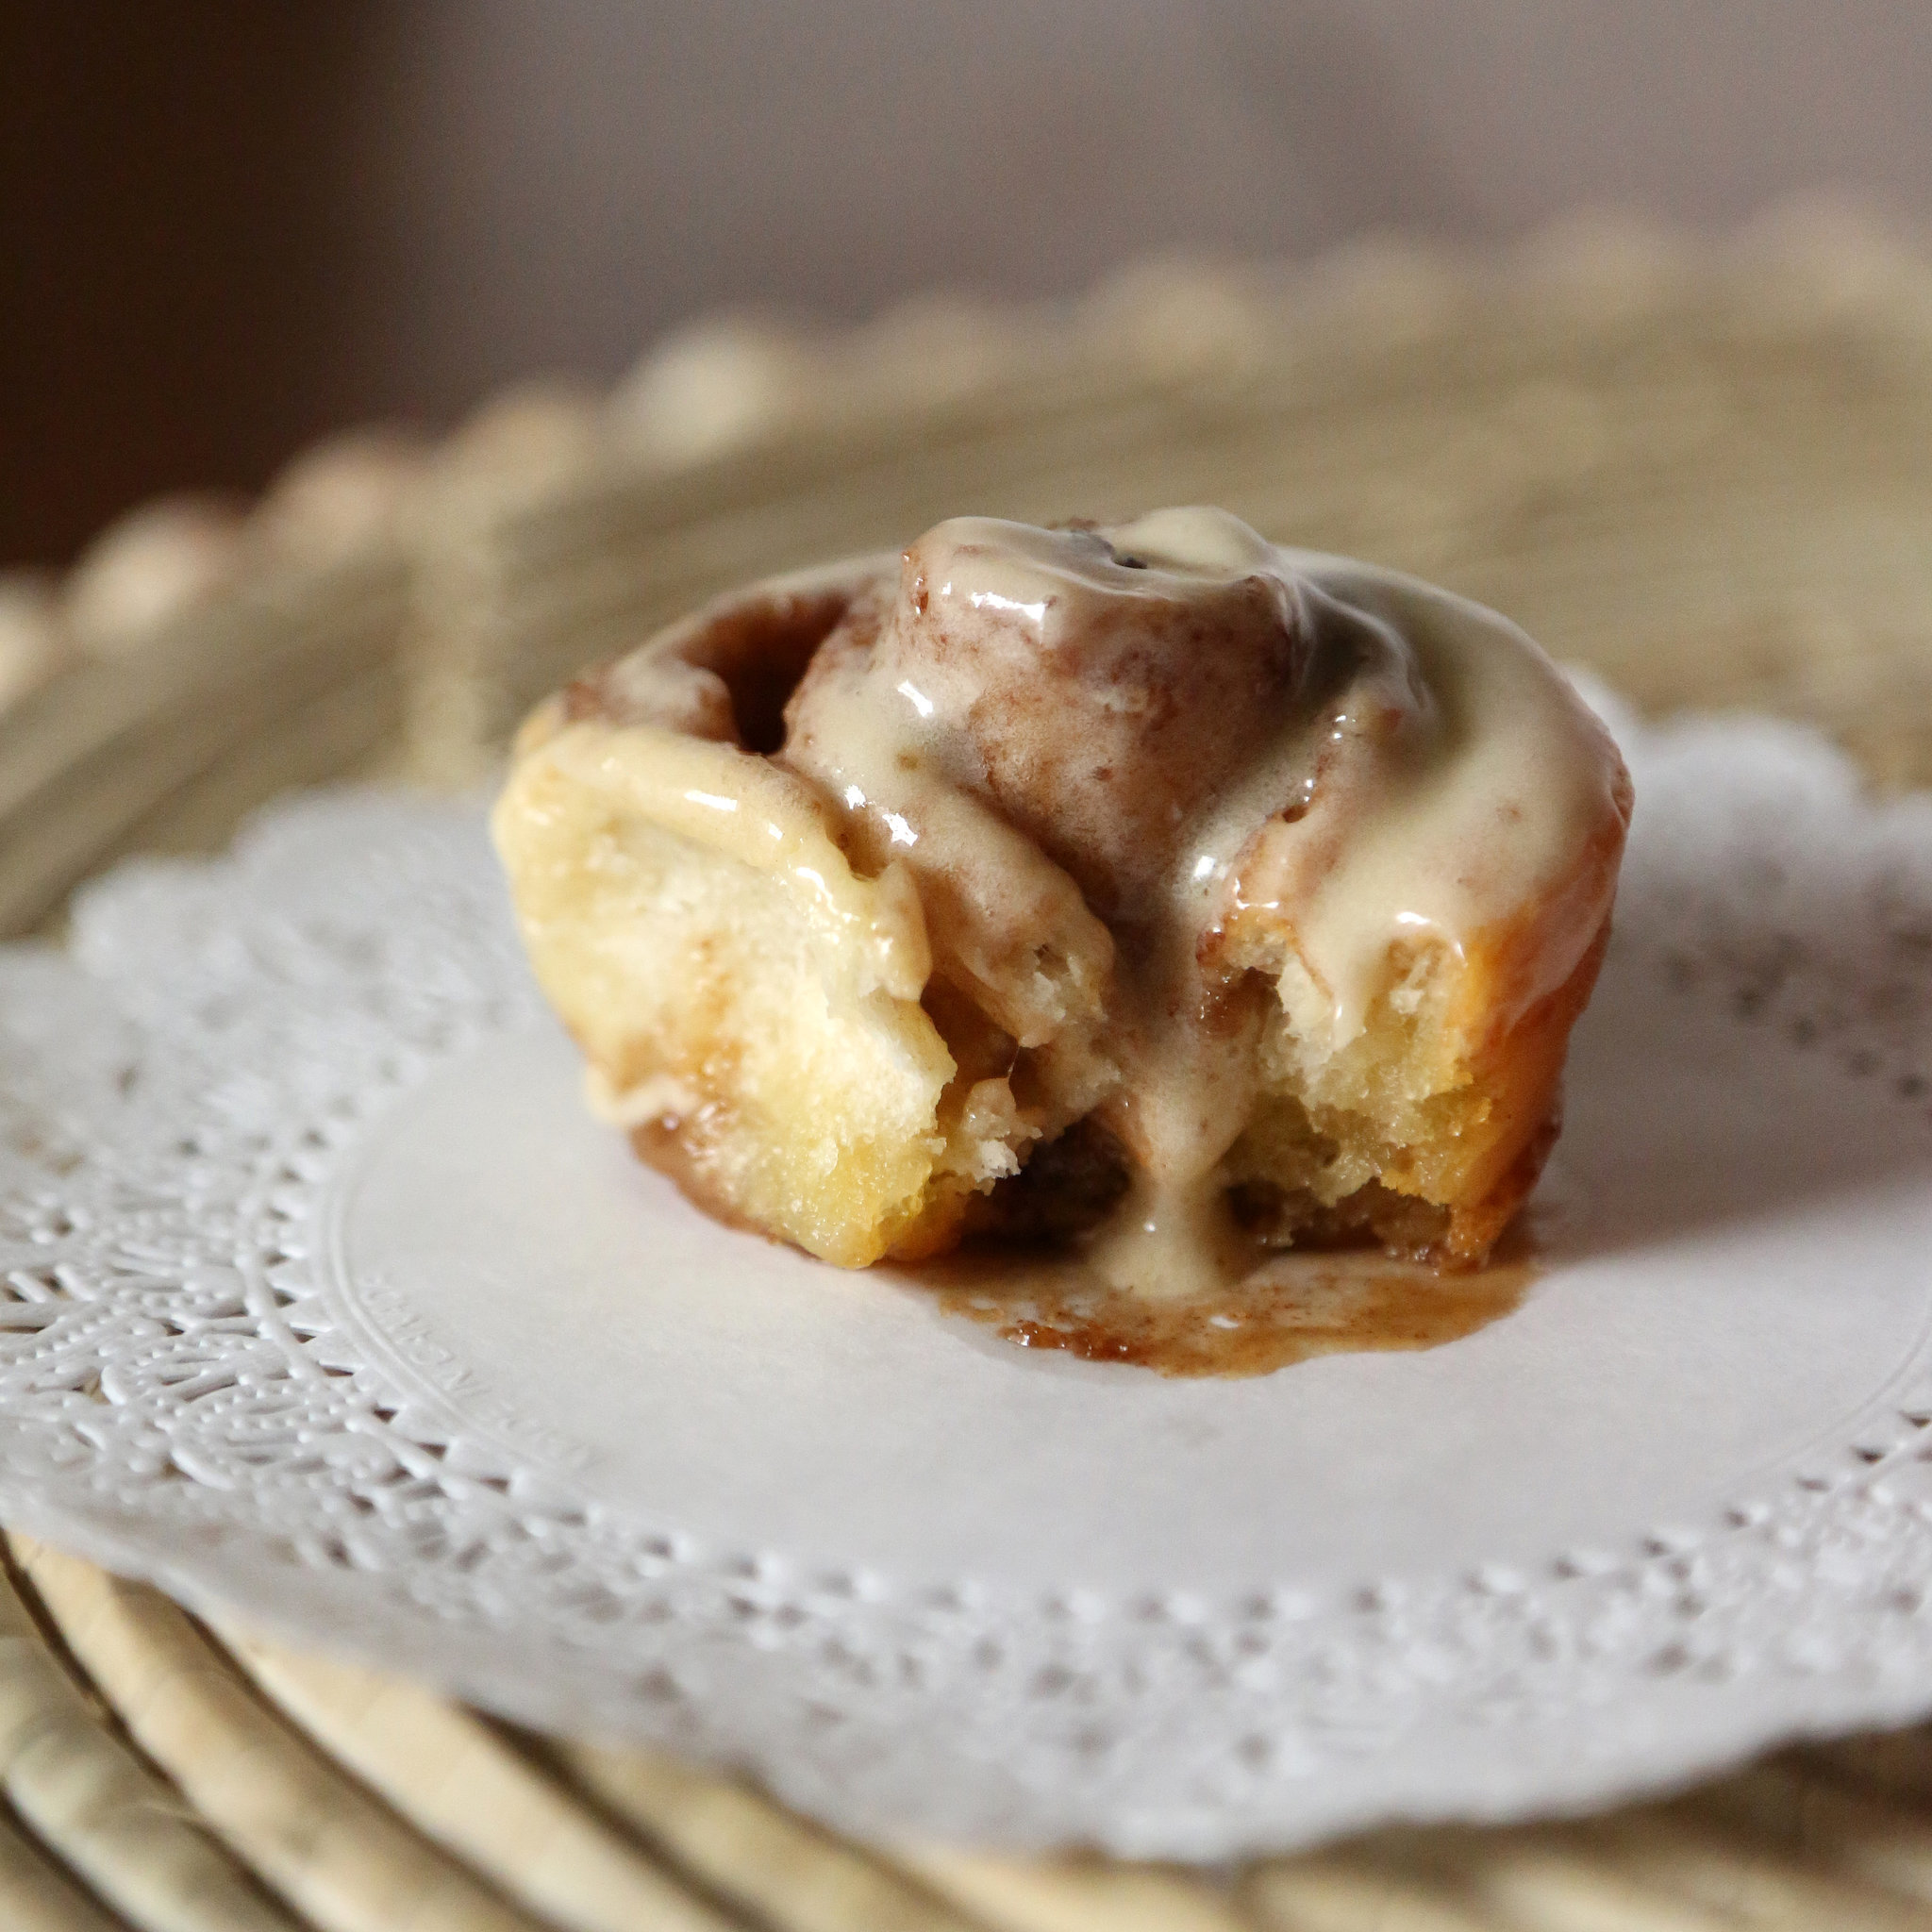 Make Fresh Cinnamon Rolls in 30 Minutes Flat With This Easy At-Home Recipe